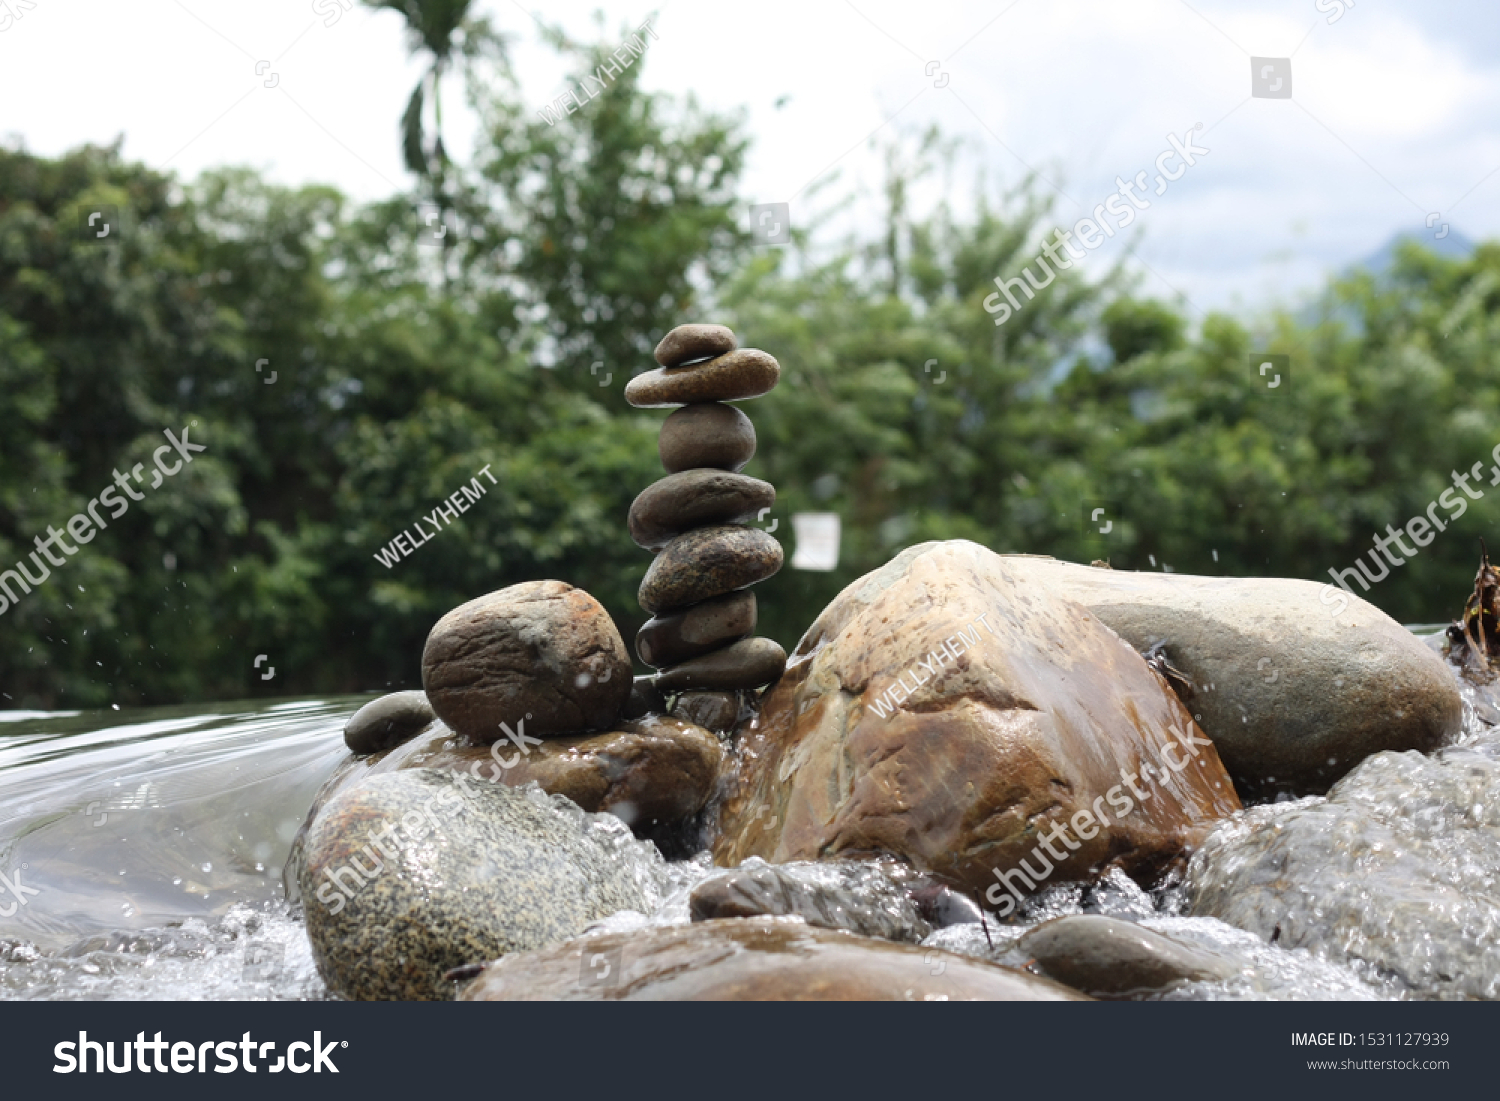 STONE BALANCING
stone balancing is an art, discipline, or hobby in which rocks are naturally balanced on top of one another in various positions without the use of adhesives, wires, supports, #1531127939